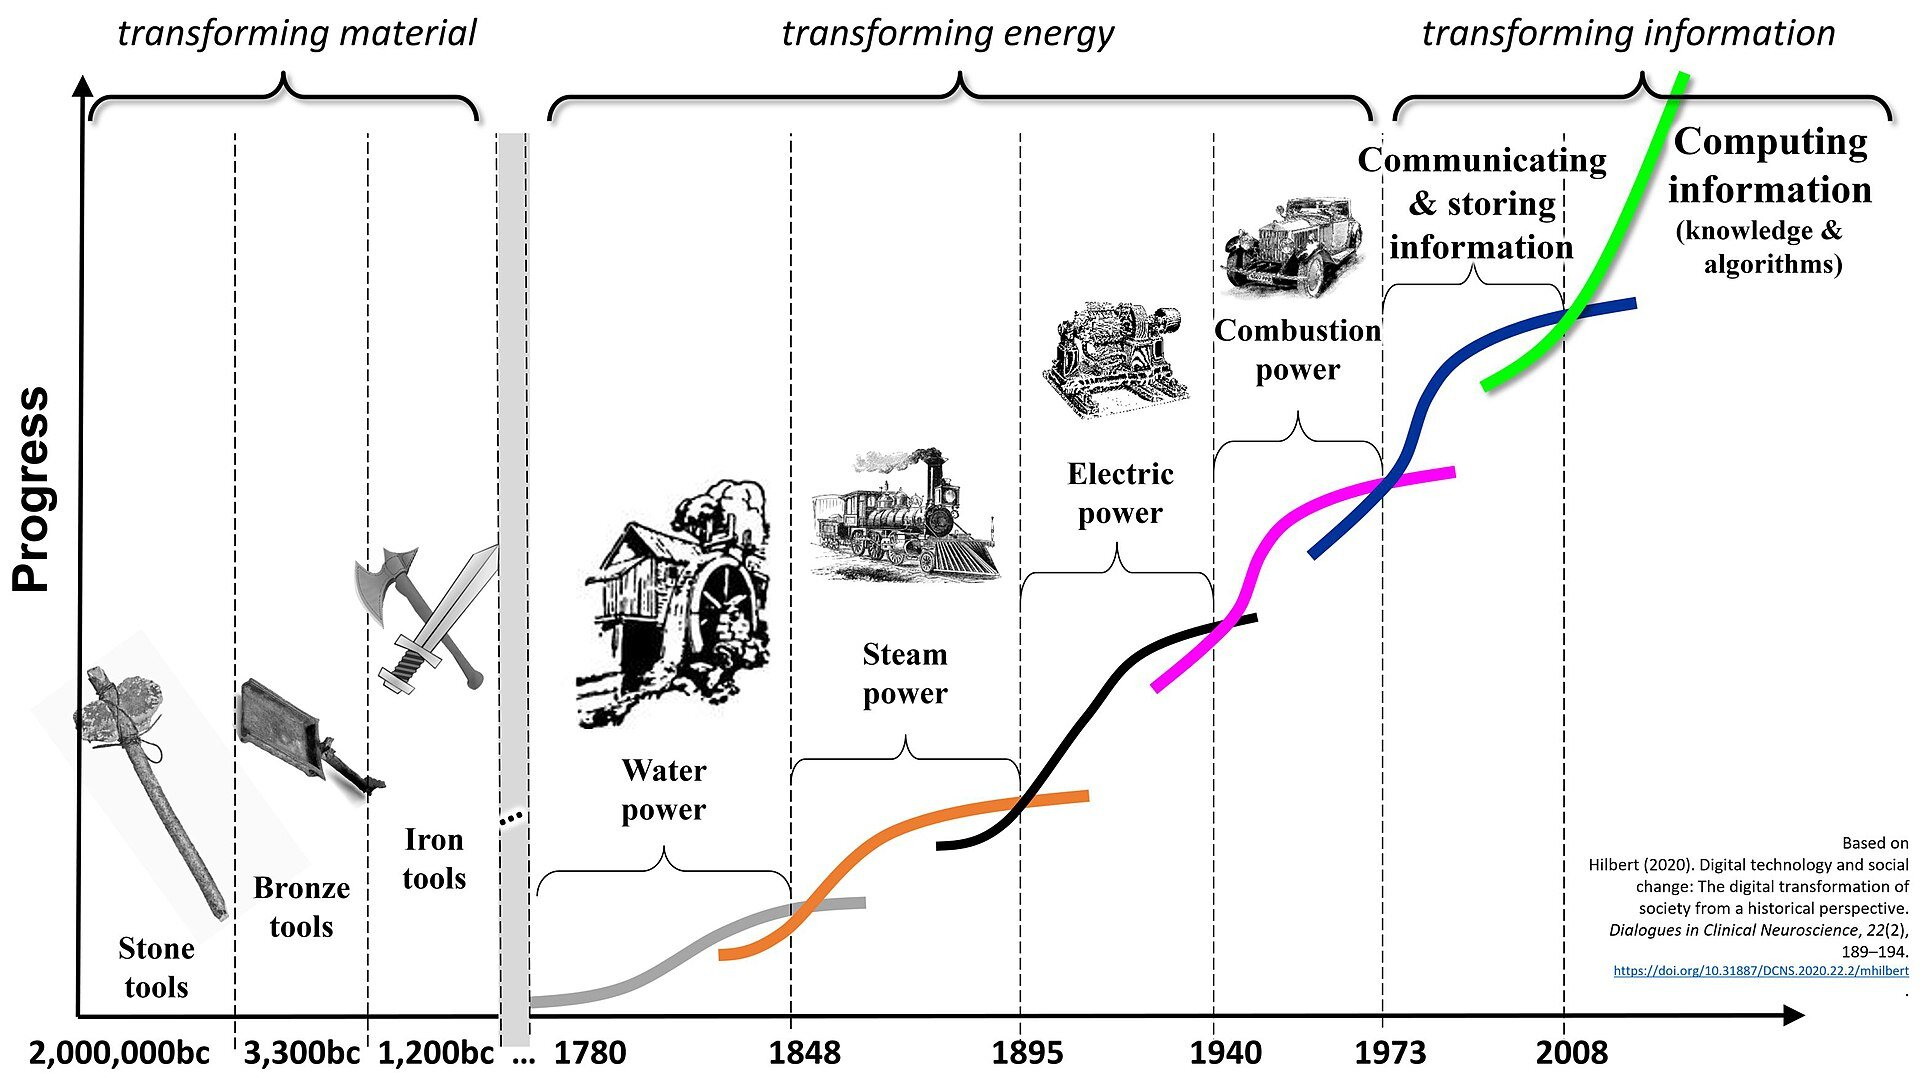 From "Technological Revolutions and Financial Capital" By Carlota Perez. Notice the early stagnation that precedes the exponential growth of new technologies.